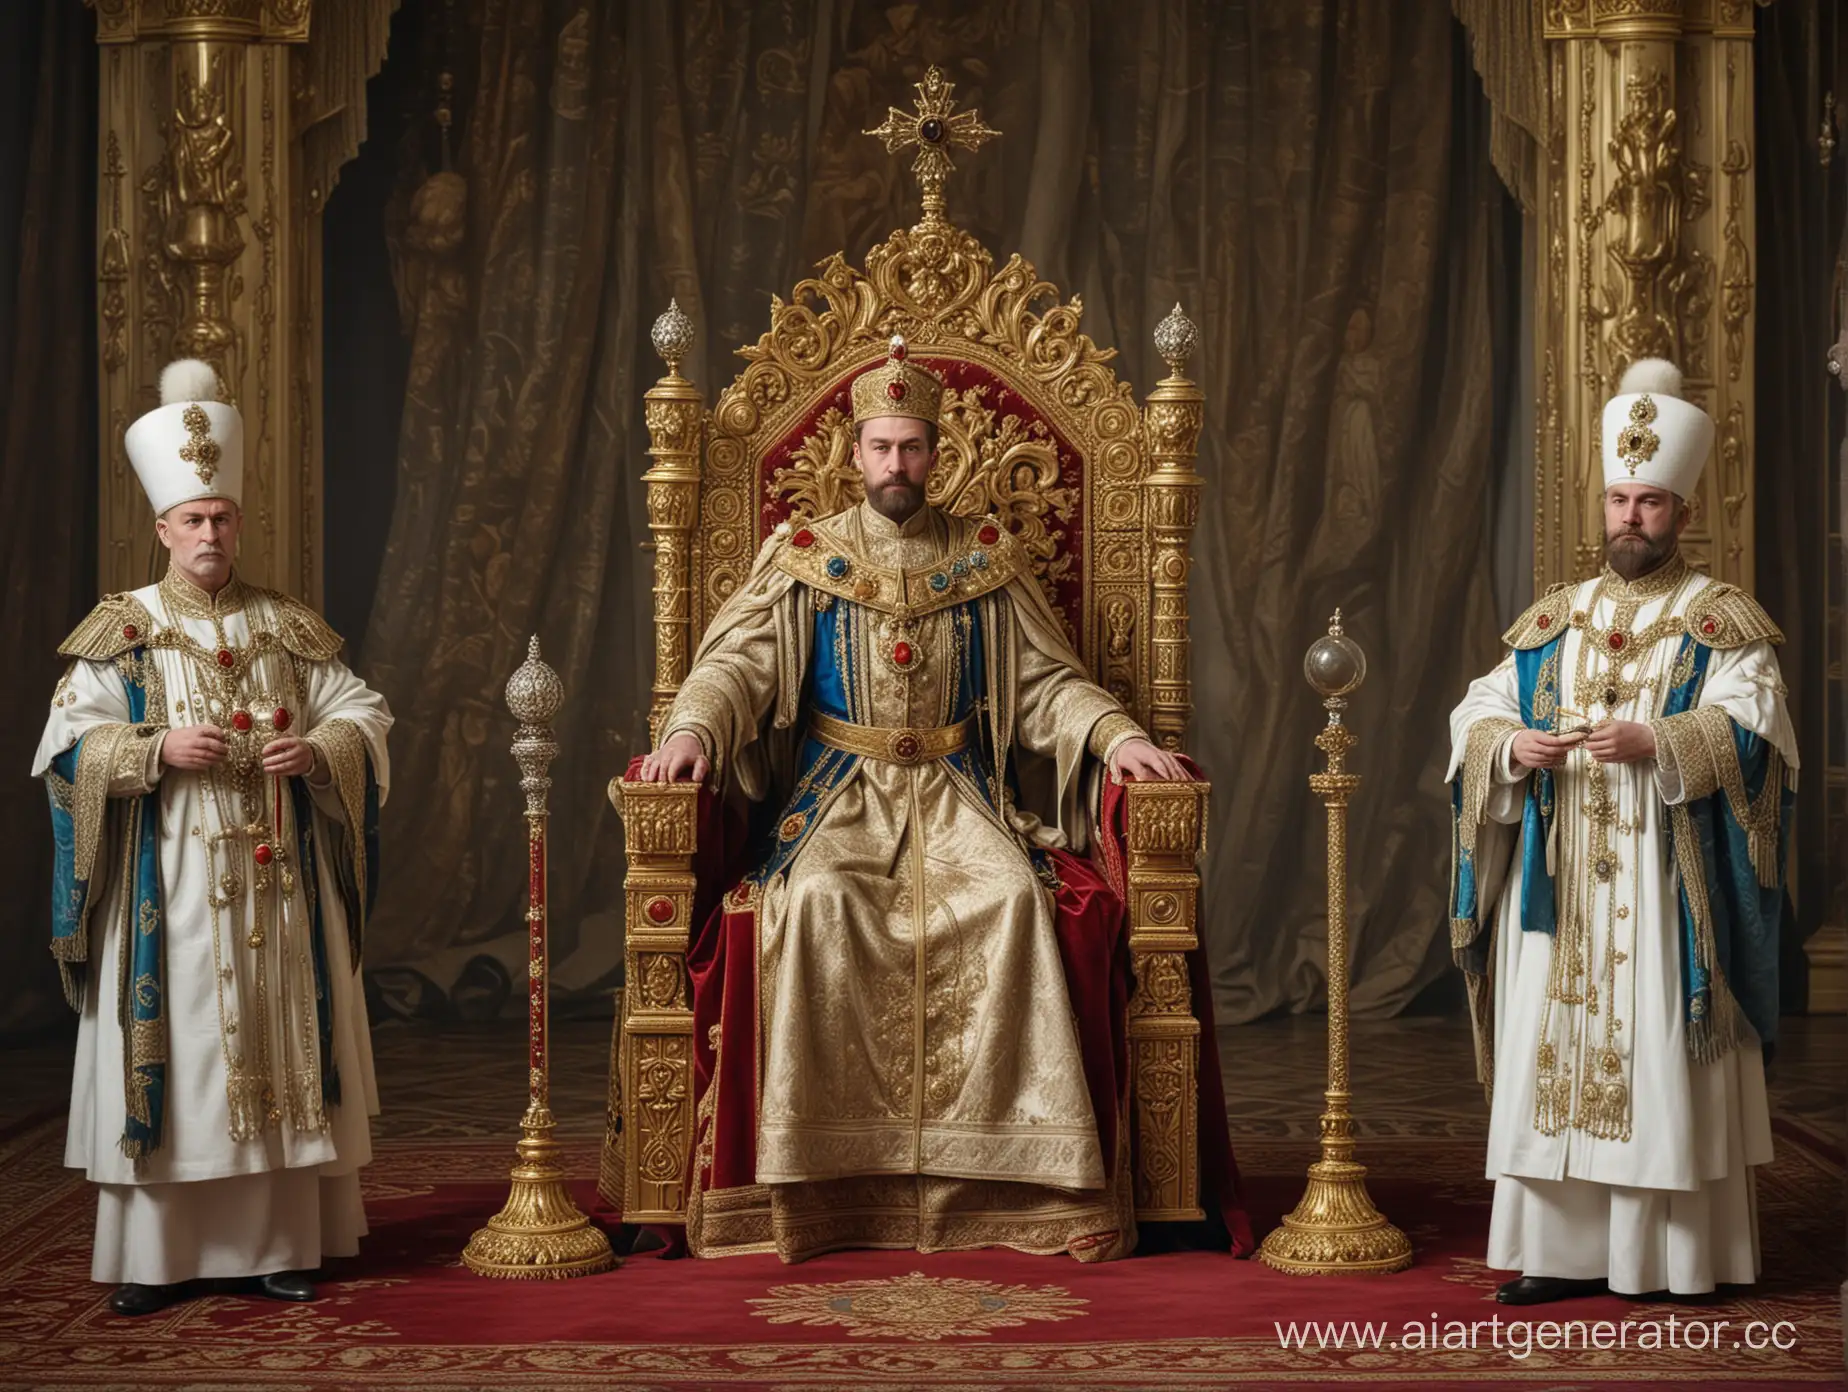 Russian-Tsar-Holding-Royal-Scepter-and-Orb-by-the-Throne